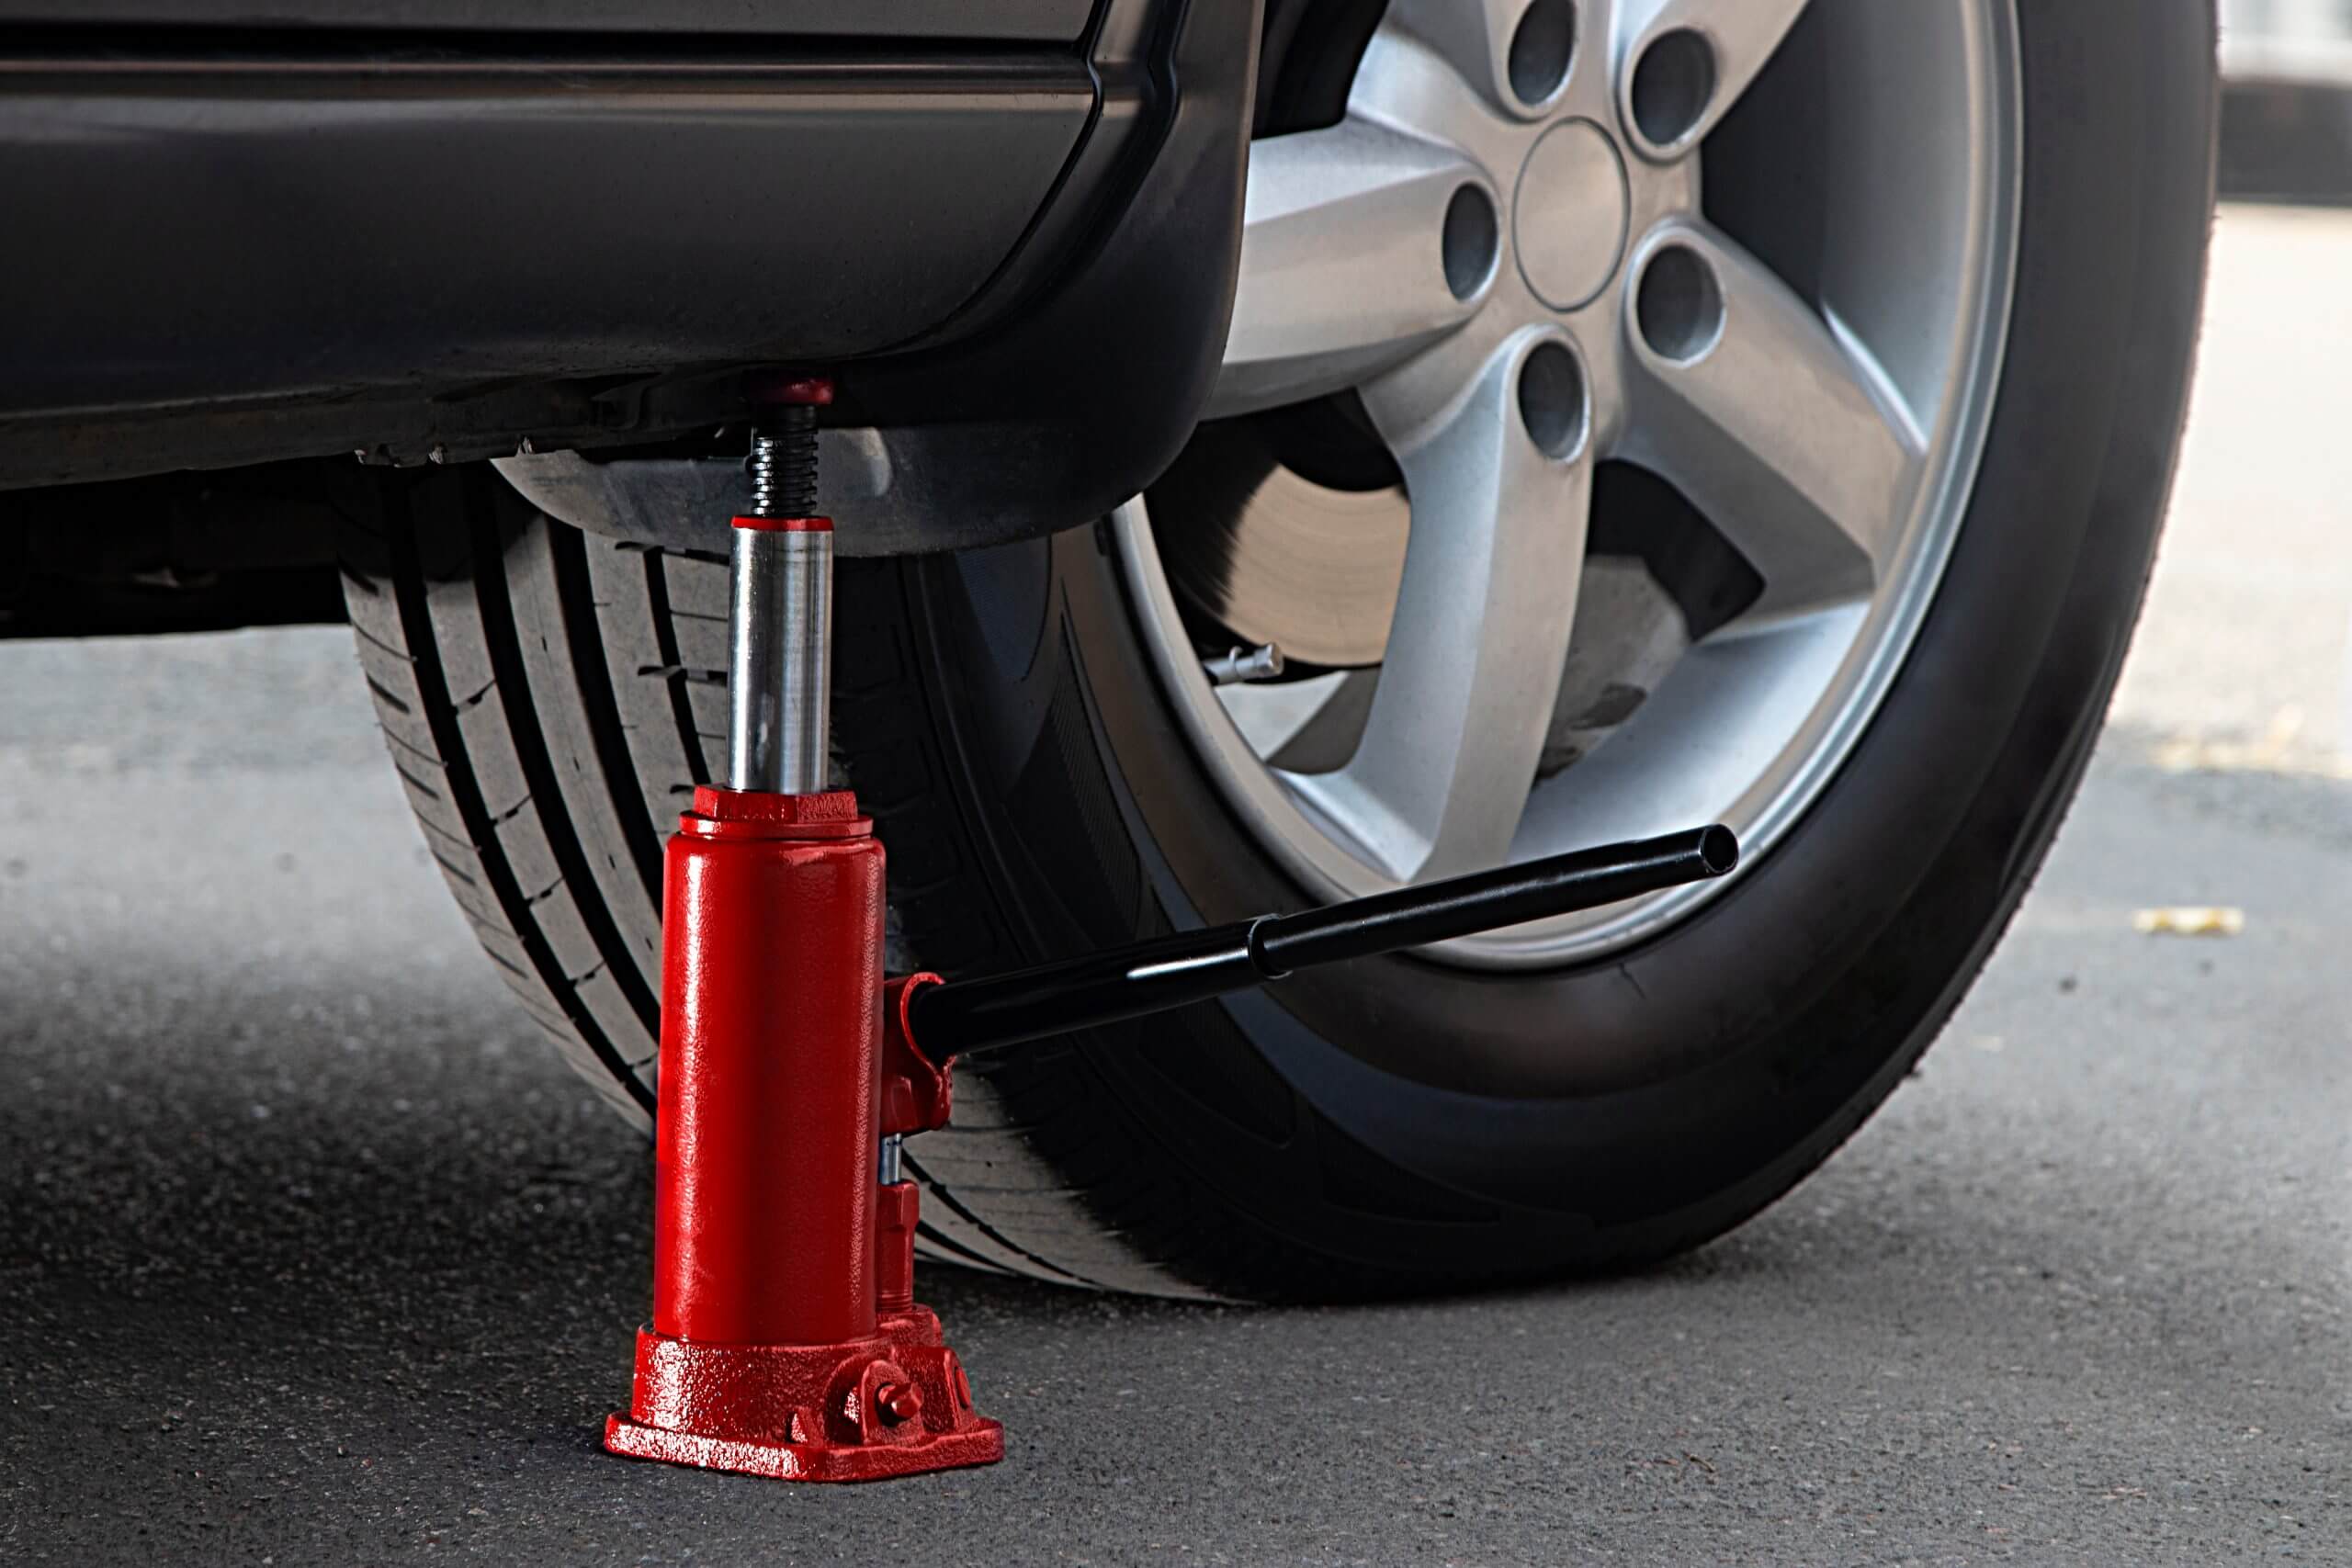 The red hydraulic bottle jack is installed under the machine and lifting it. Bottle jack near car wheel